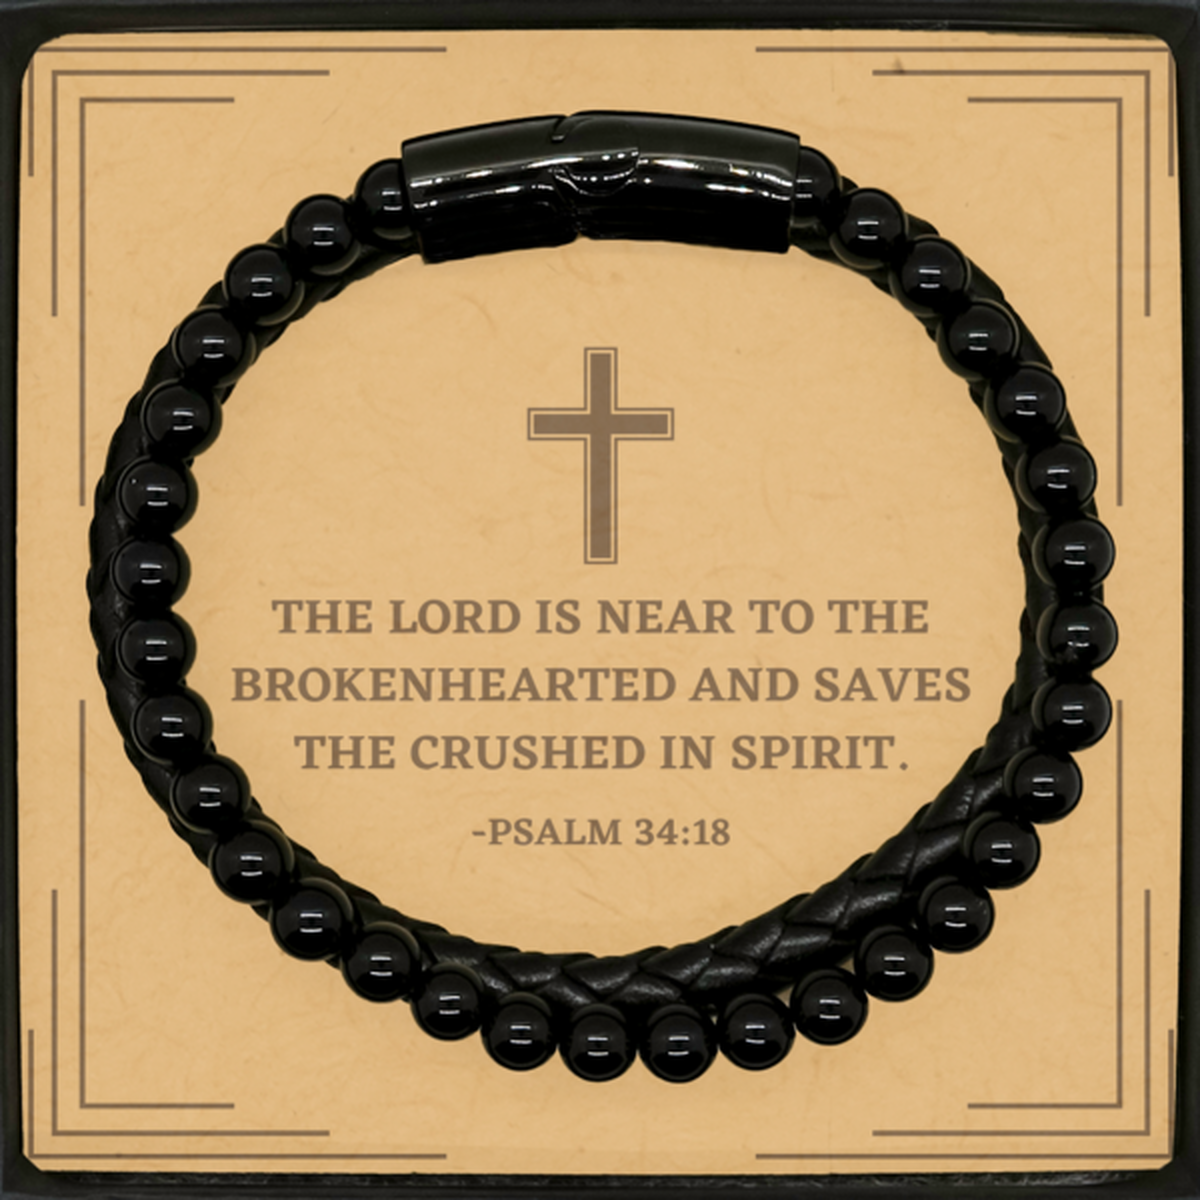 Baptism Gifts For Teenage Boys Girls, Christian Bible Verse Stone Leather Bracelet, The Lord is near to the brokenhearted, Confirmation Gifts, Bible Verse Card for Son, Godson, Grandson